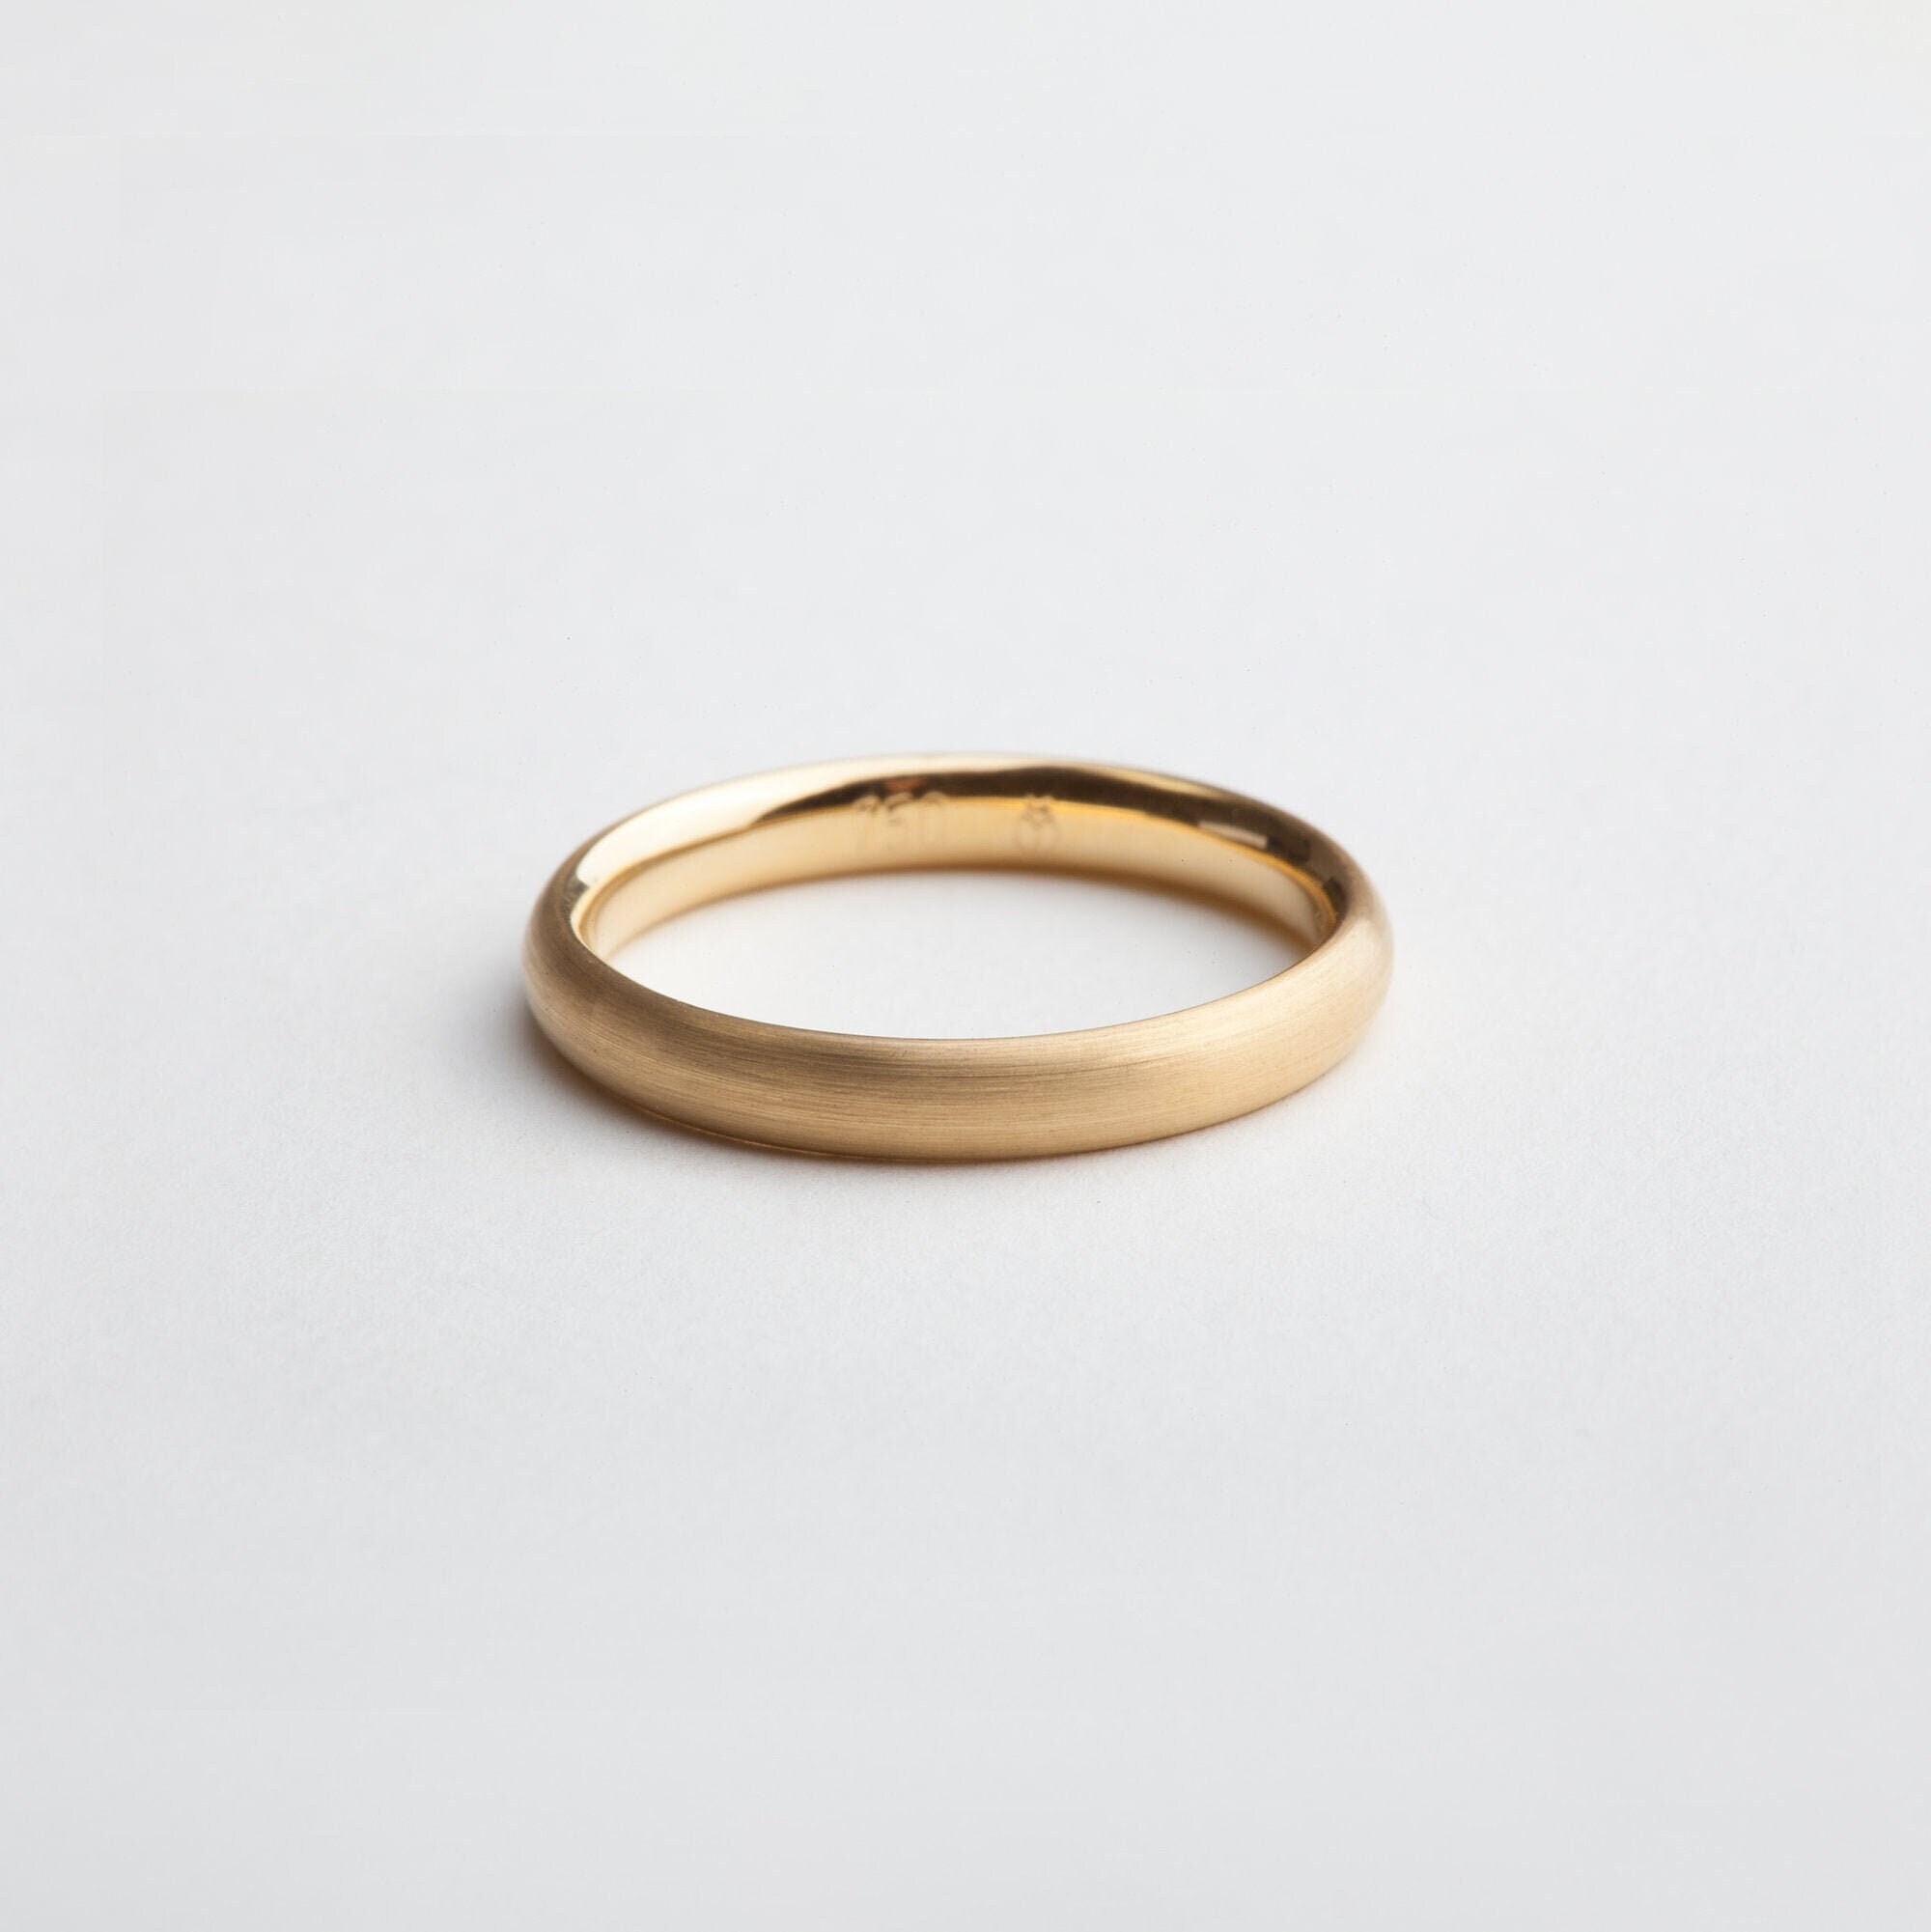 Gold Wedding Ring in Goa - Dealers, Manufacturers & Suppliers - Justdial